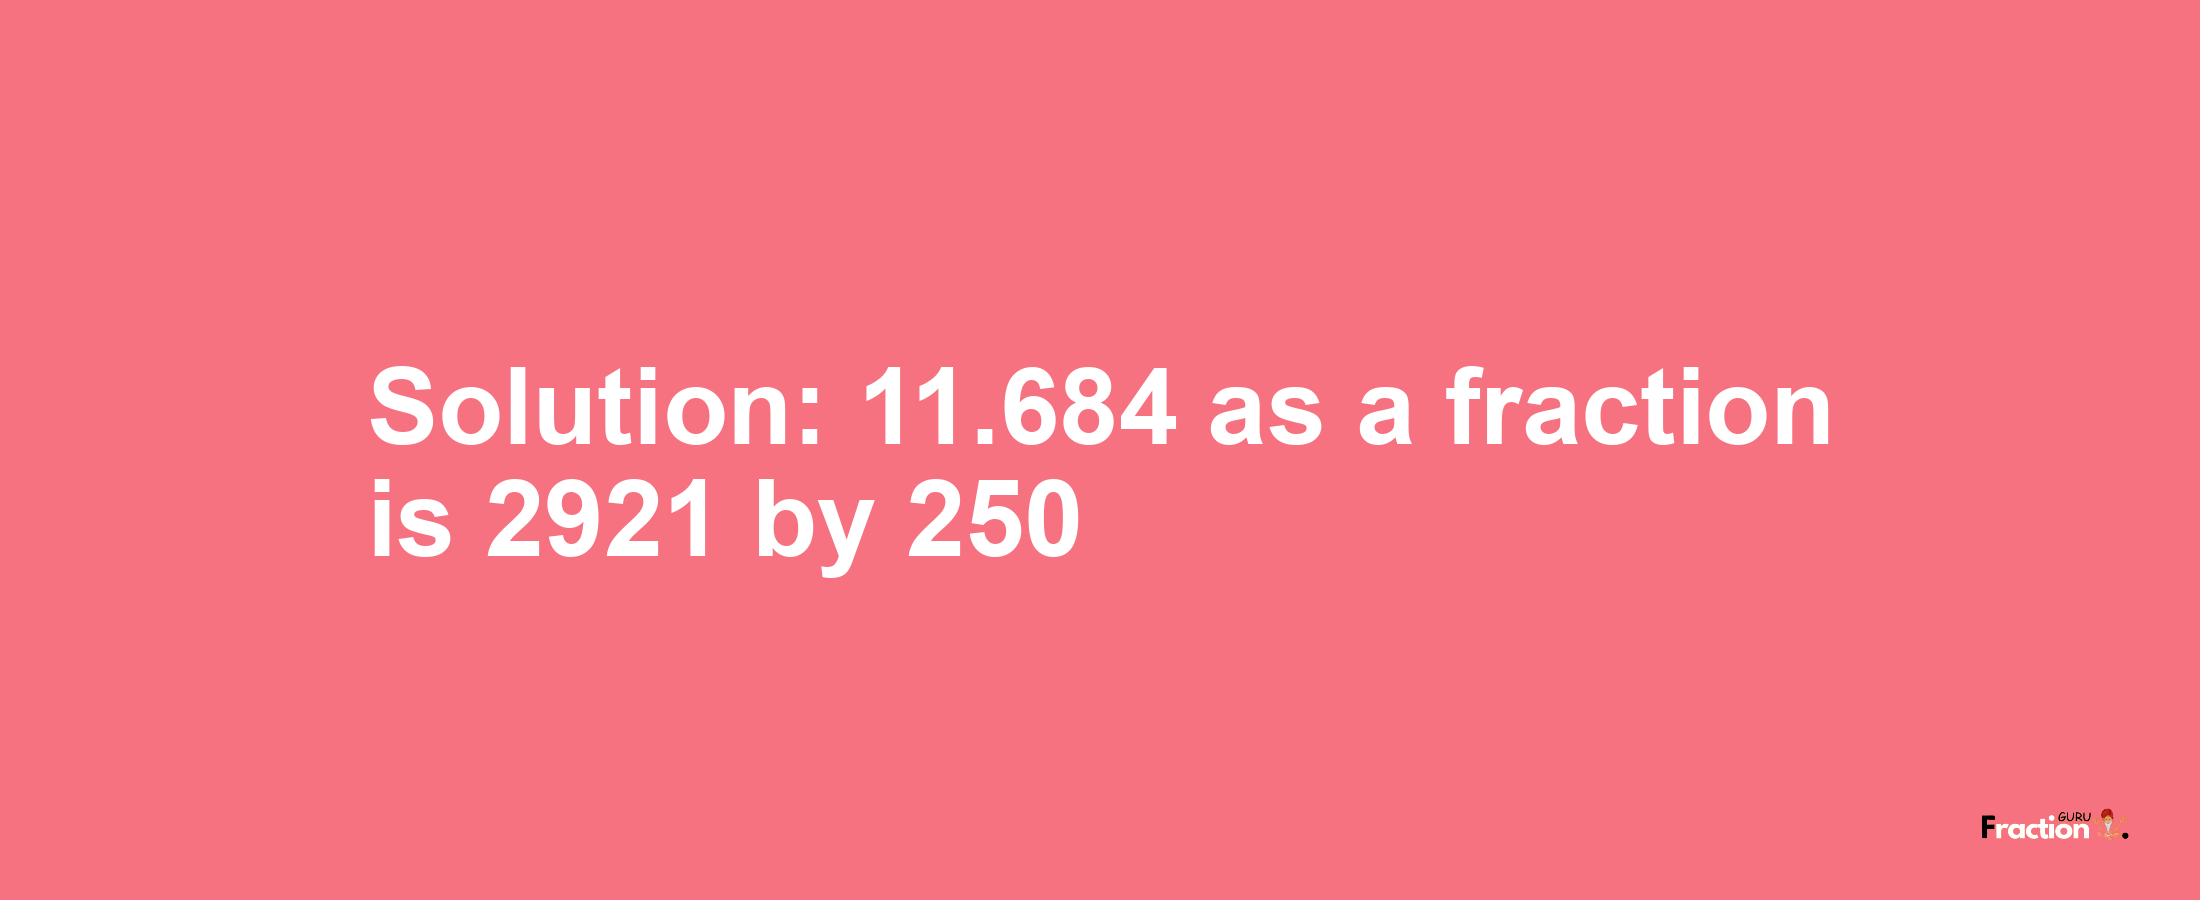 Solution:11.684 as a fraction is 2921/250